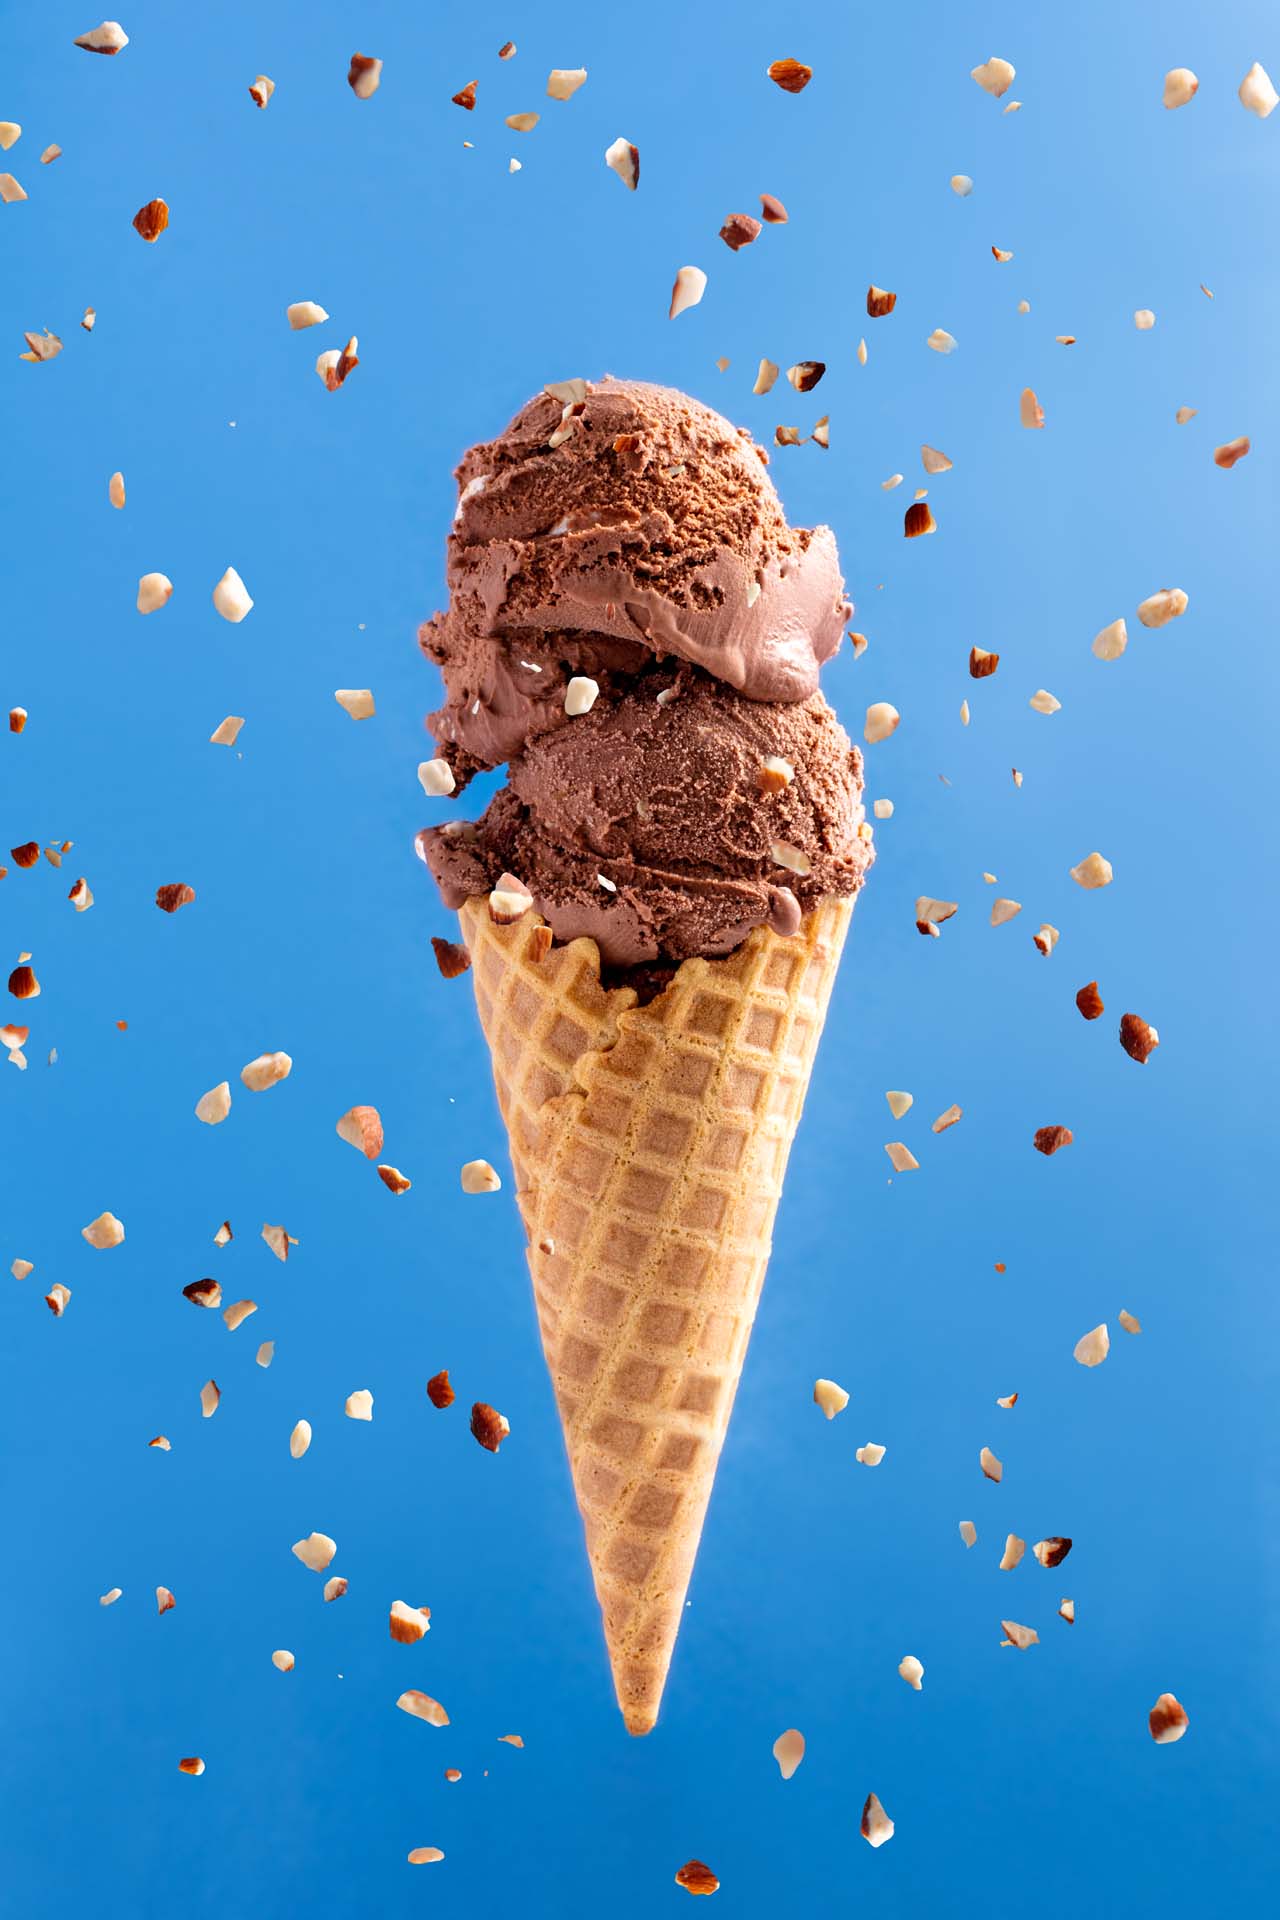 An Ice Cream Cone with Chocolate Ice Cream and Diced Almonds